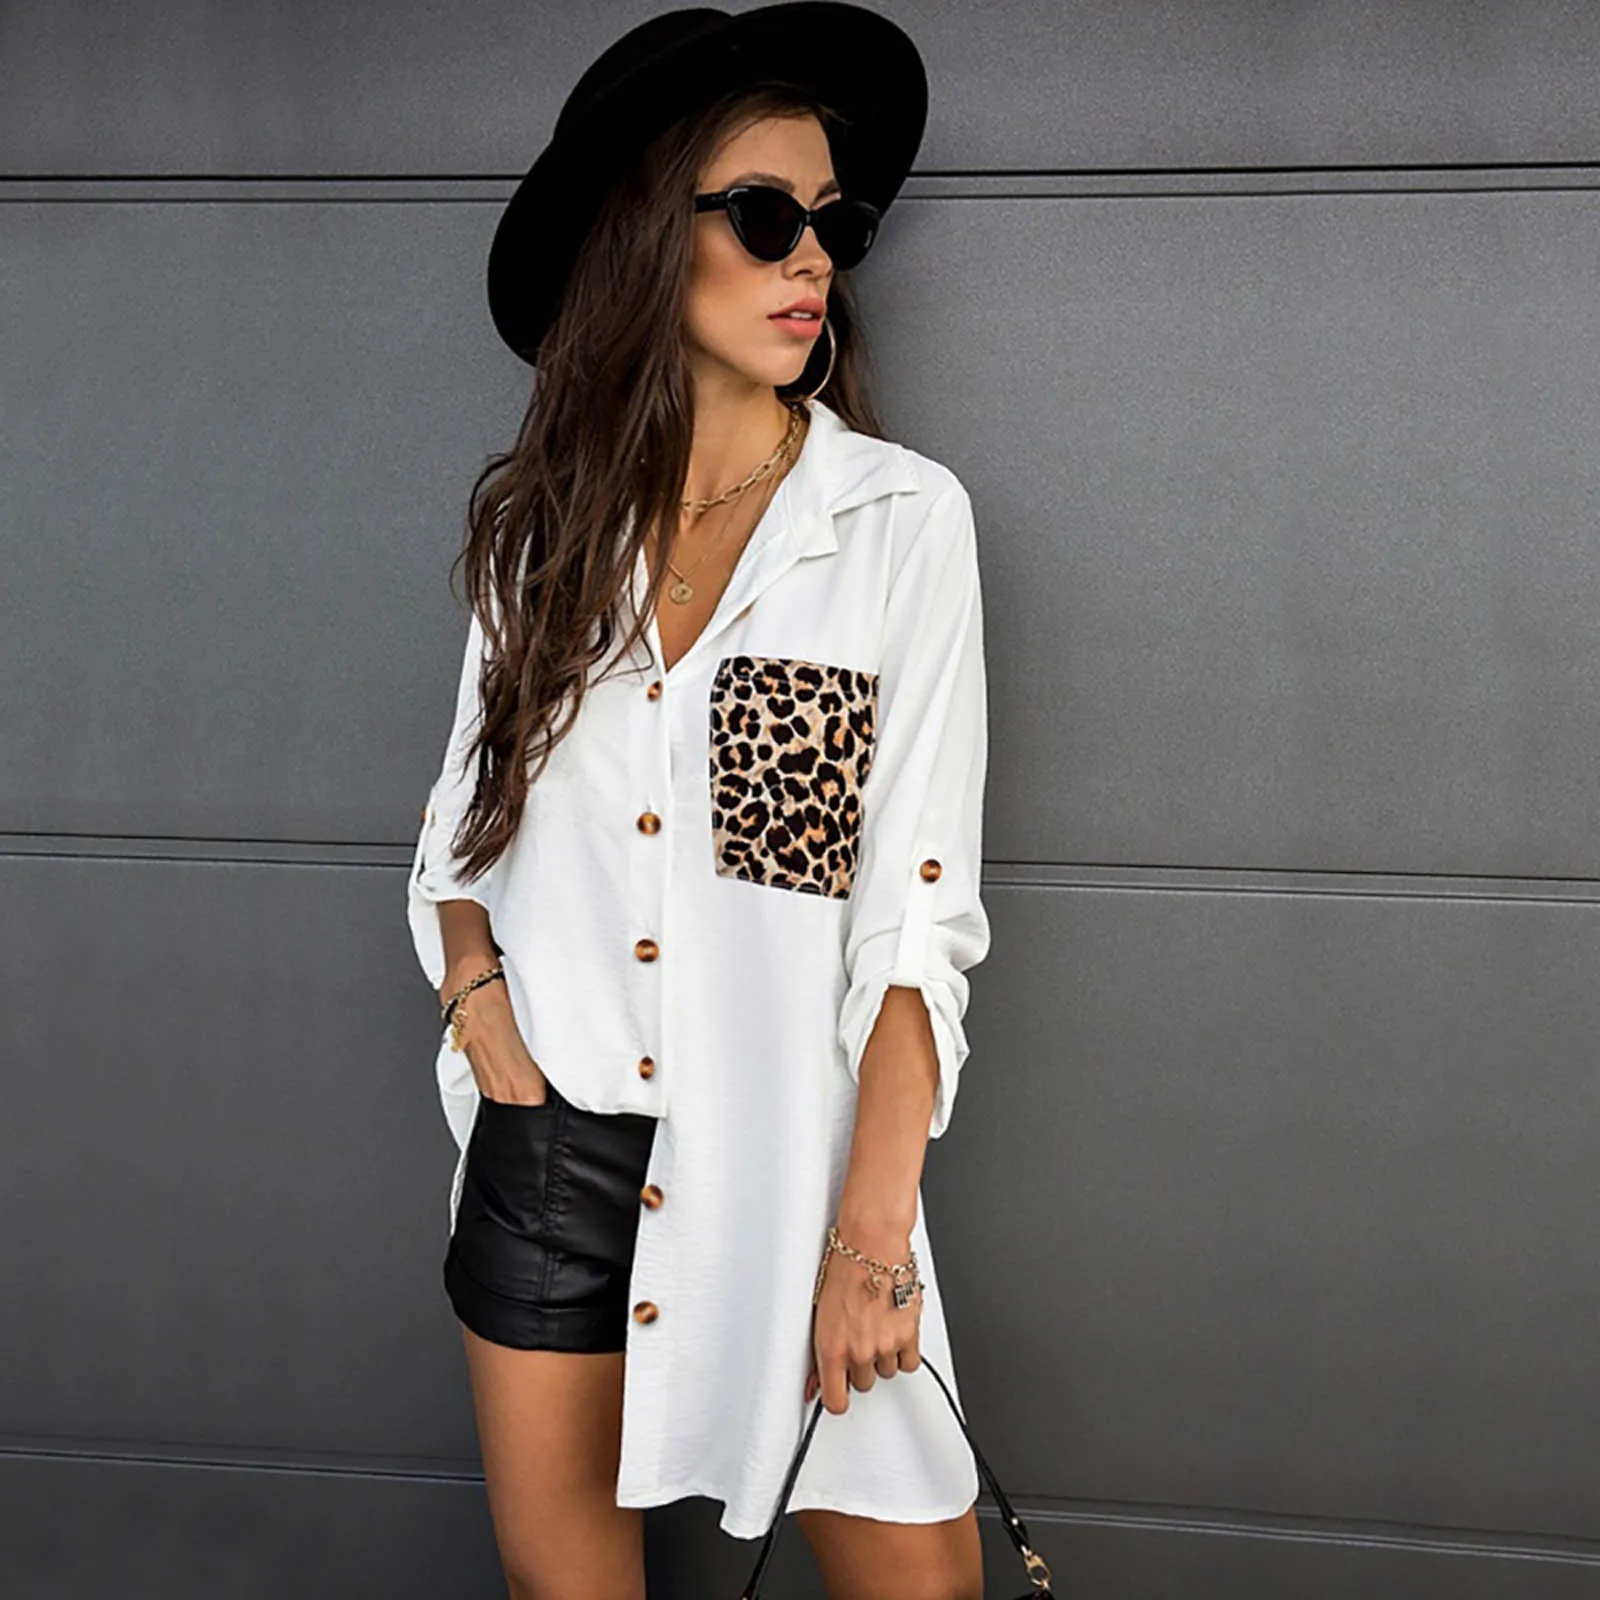 Women Fashion Solid Casual Leopard Printed Pocket Patchwork Turn-down Collar Loose Long Sleeves Shirt Blouse